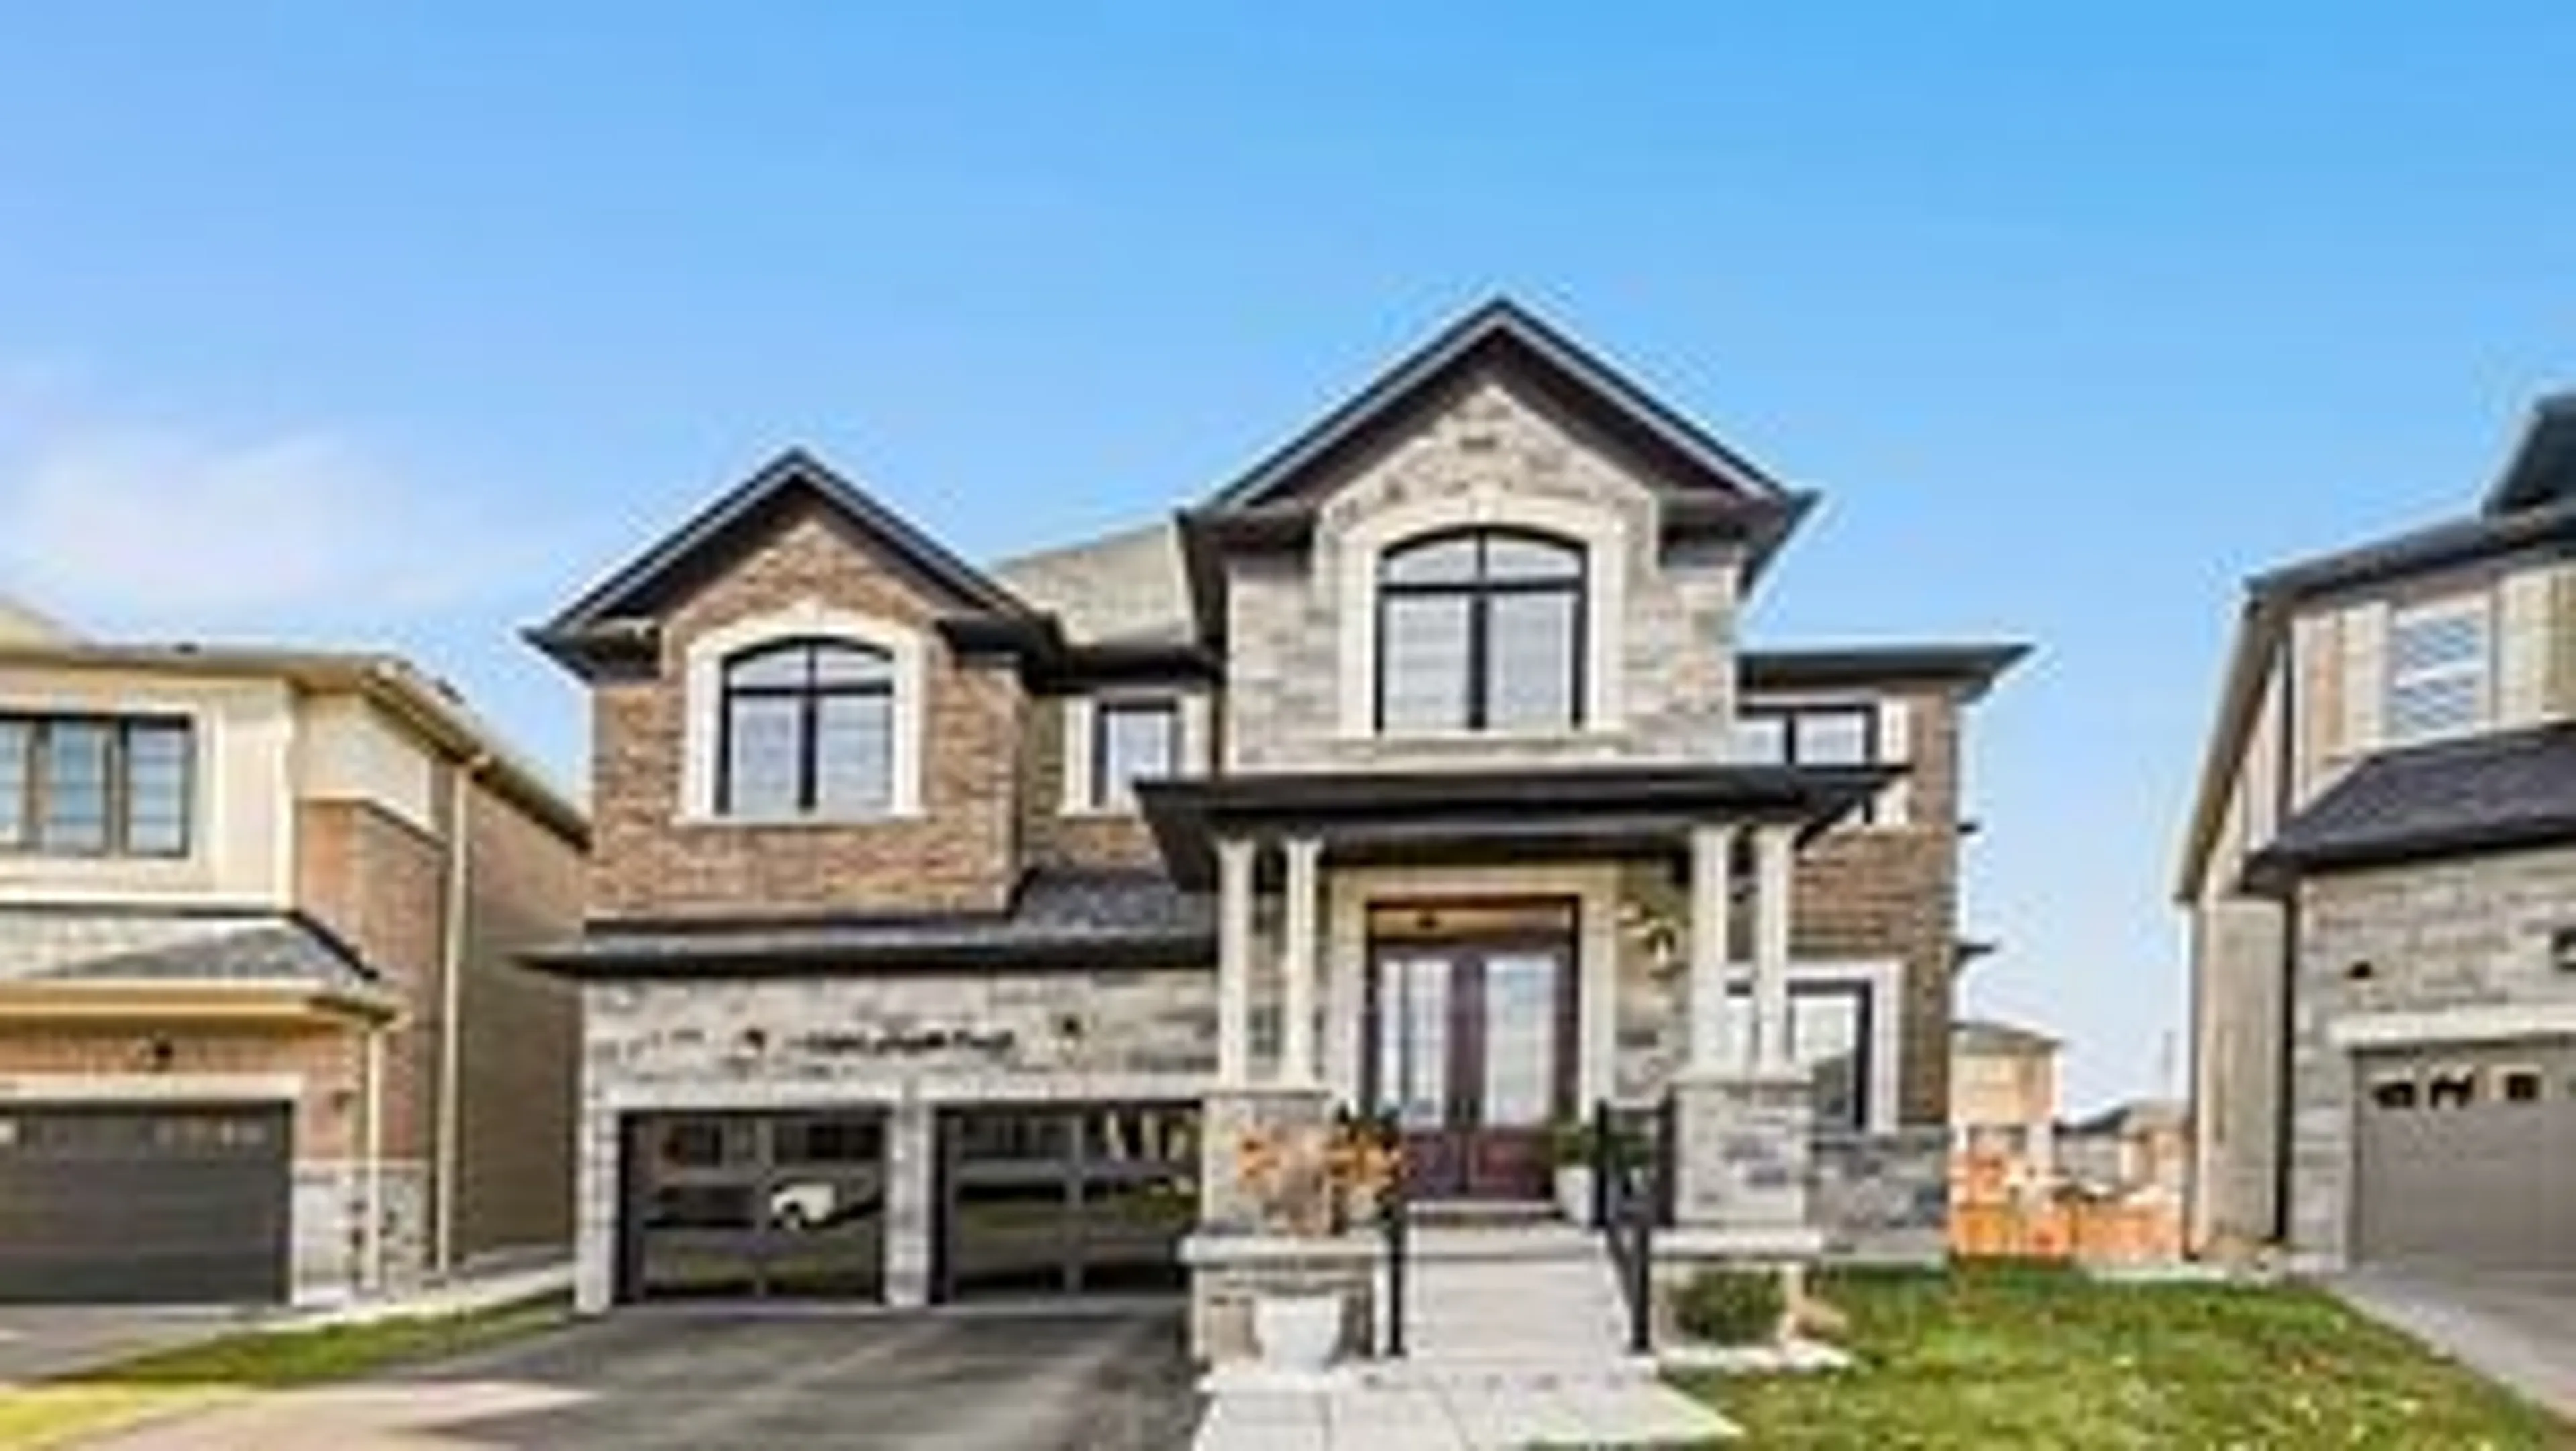 Home with stone exterior material for 1384 Argall Crt, Milton Ontario L9T 7K6